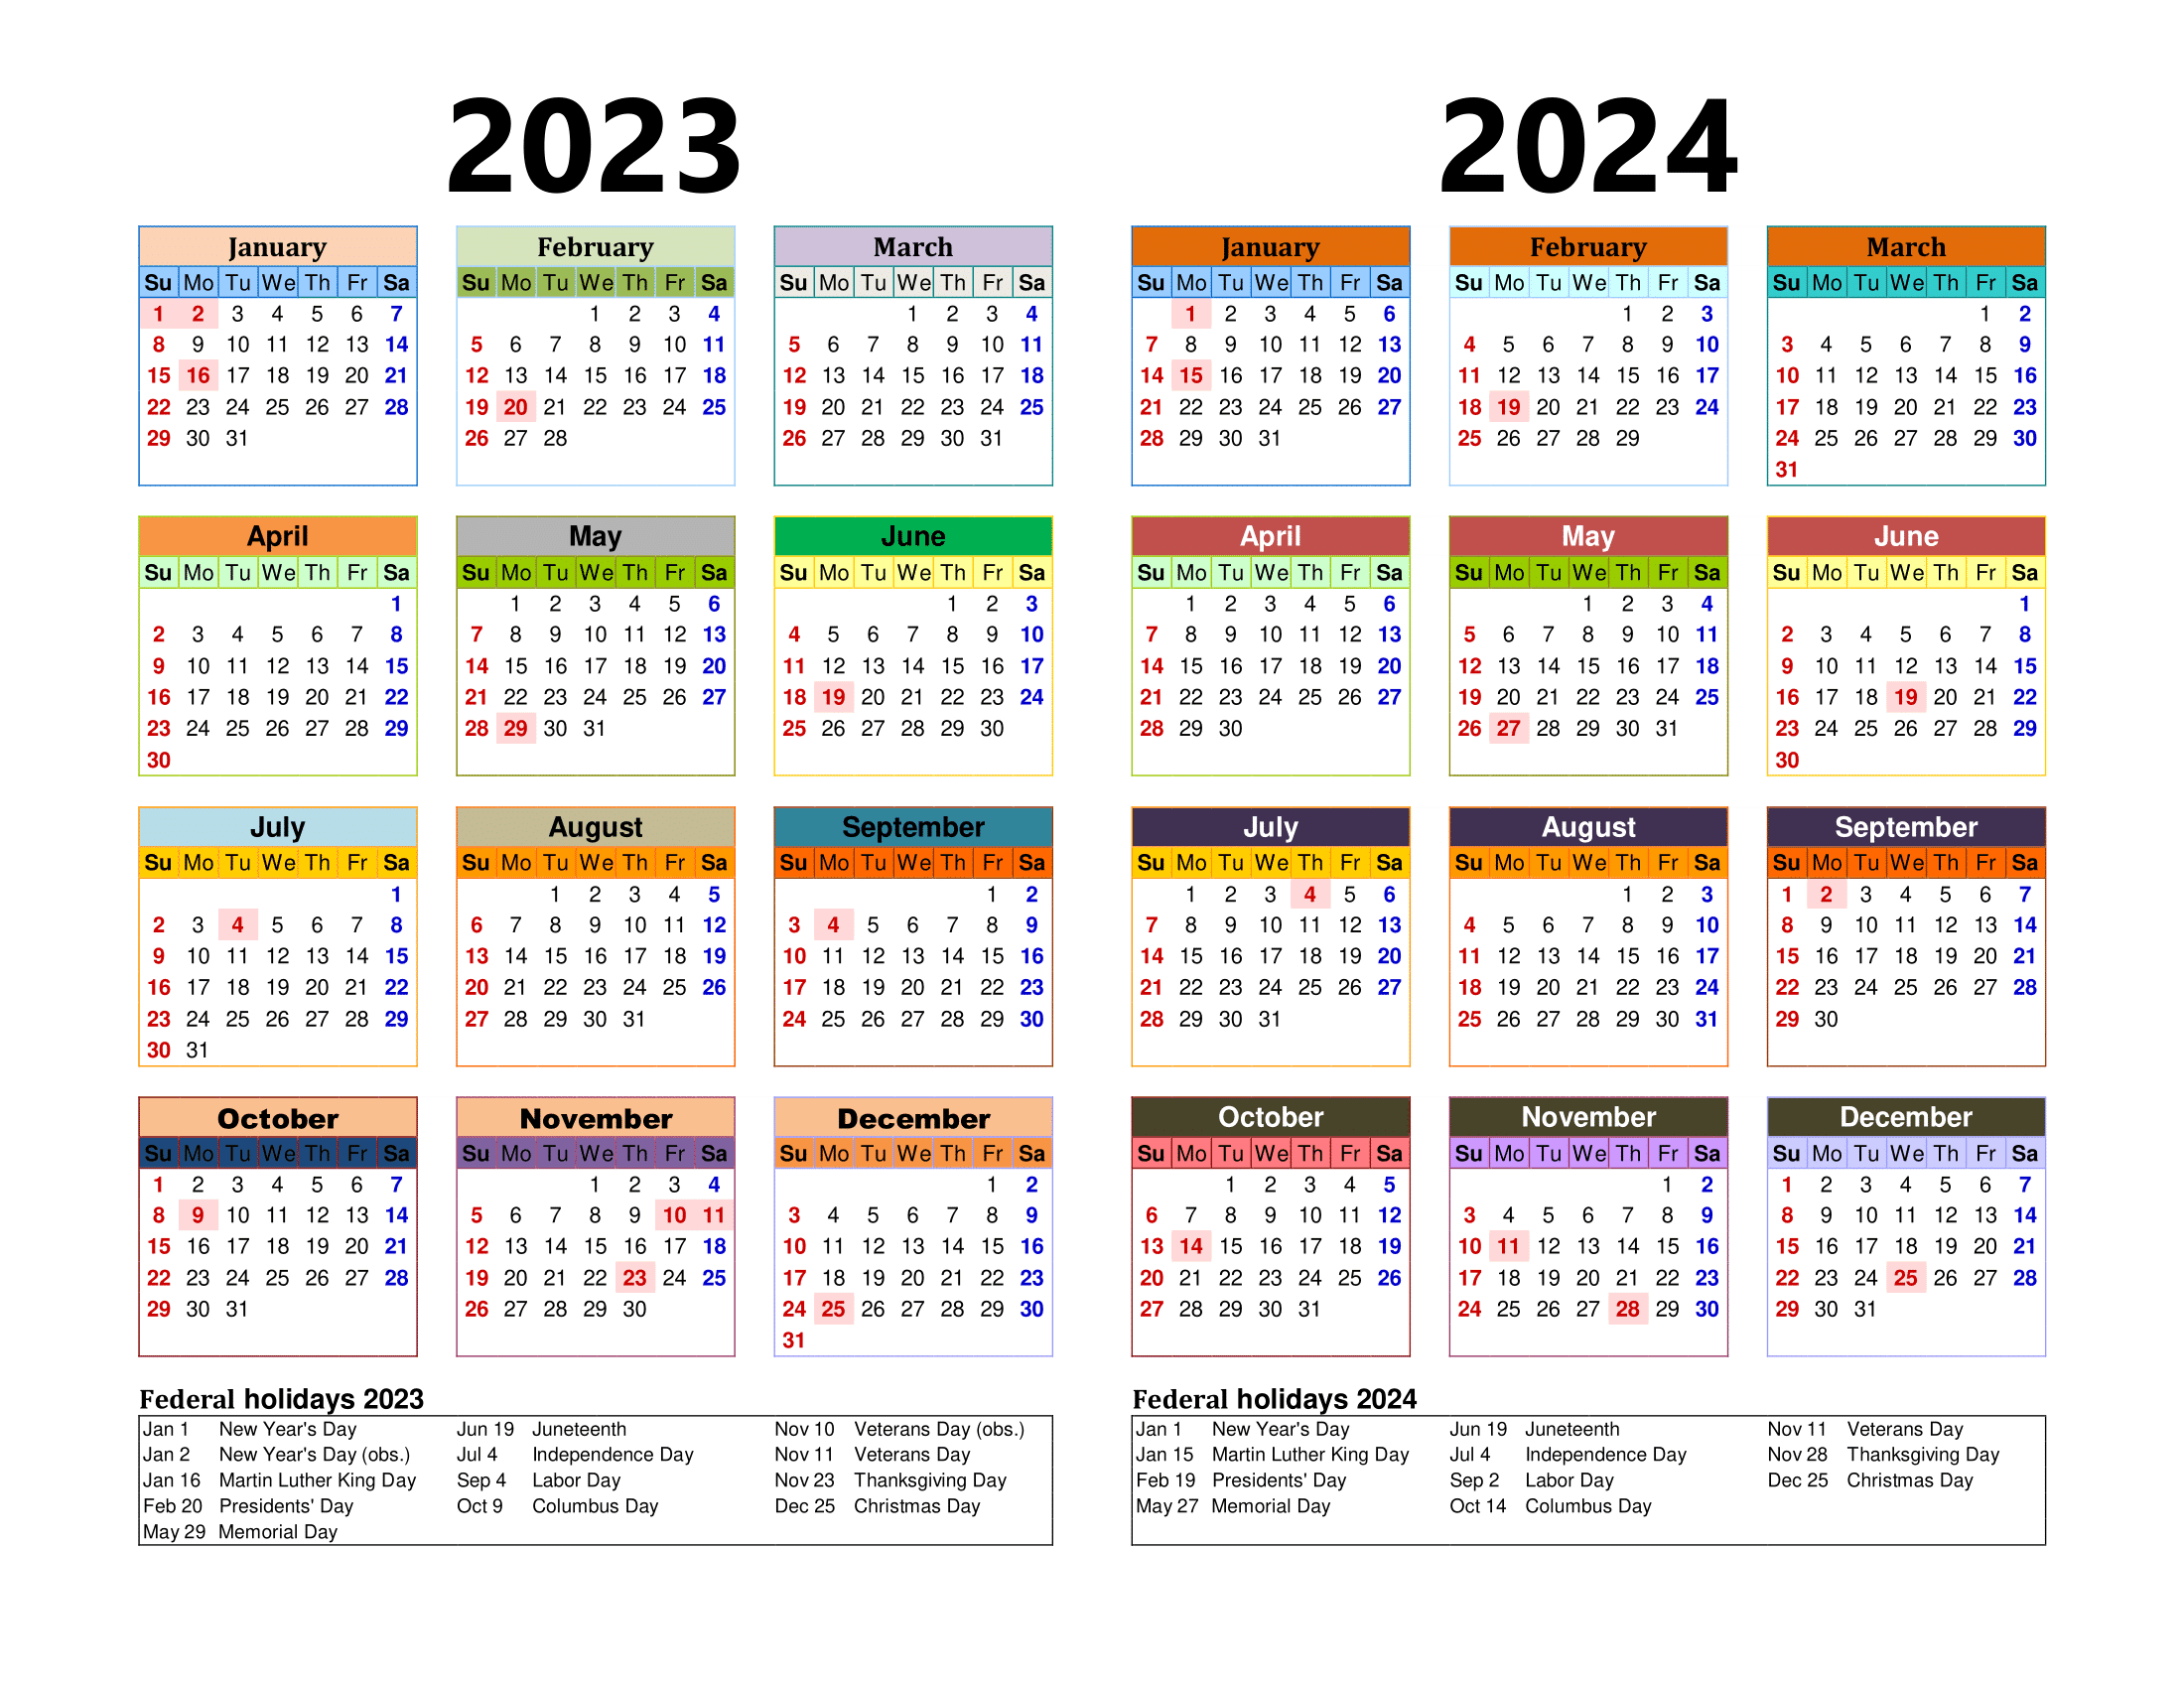 Free Printable Two Year Calendar Templates For 2023 And 2024 In Pdf with regard to Free Printable Calendar 2024 Hong Kong